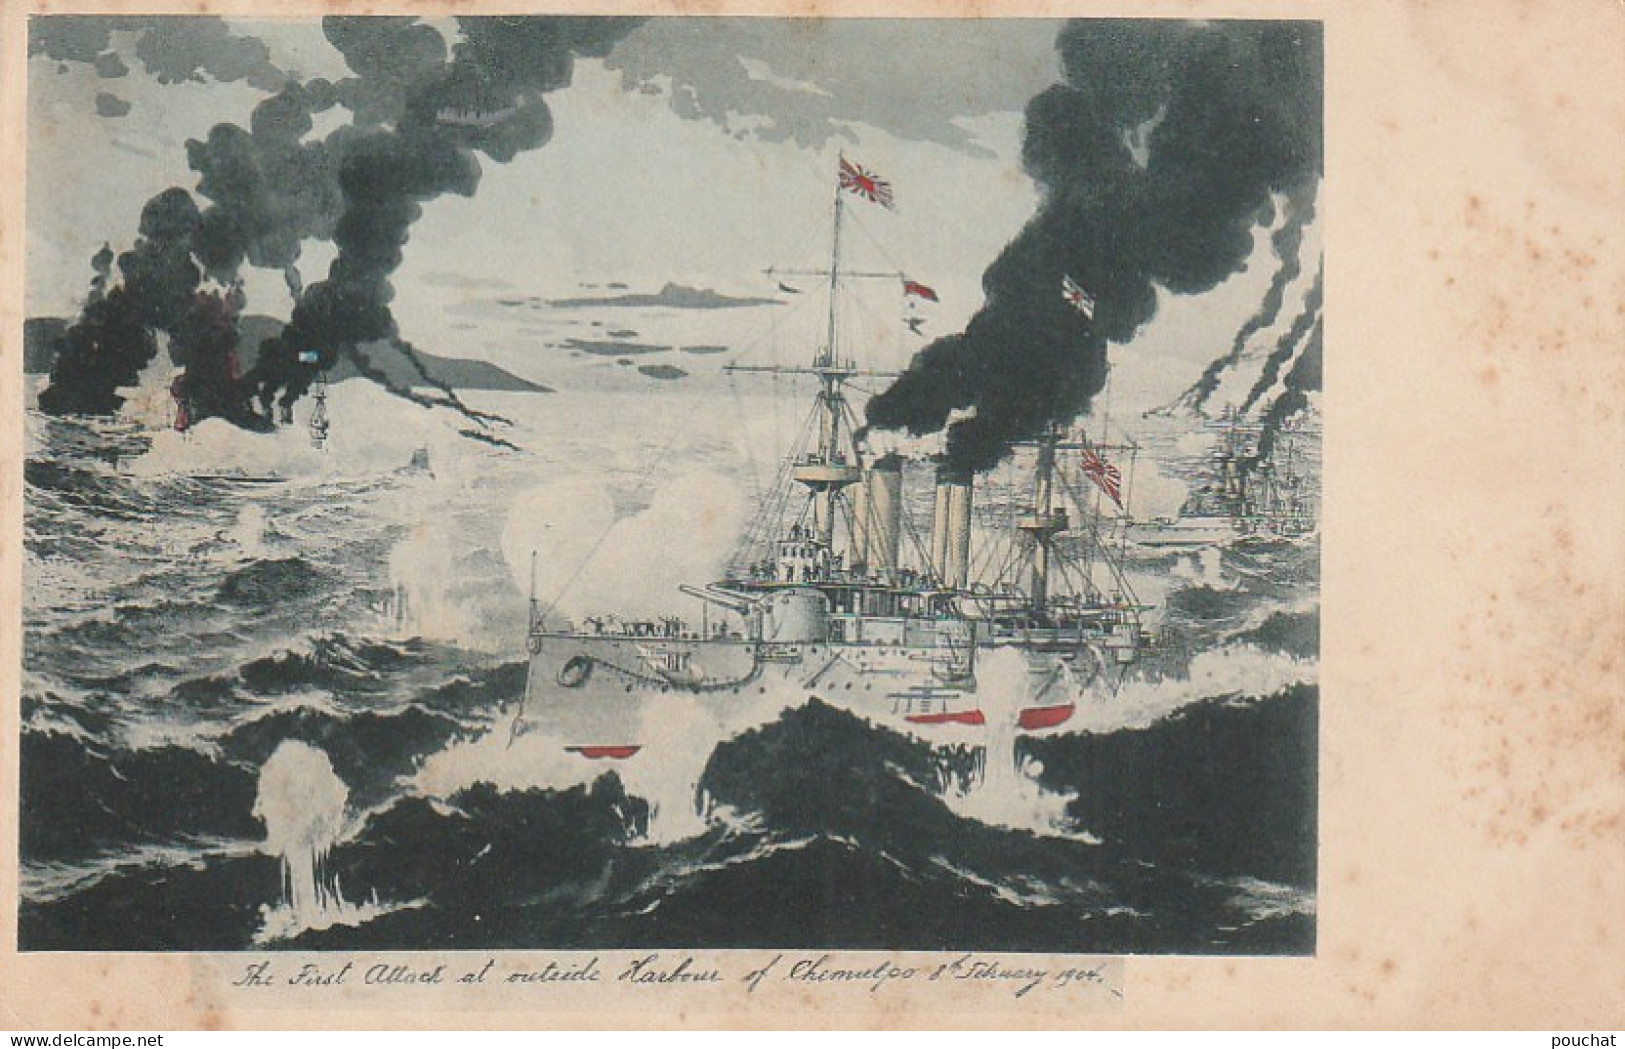 VE 24- THE FIRST ATTACK AT OUTSIDE HARBOUR OF CHEMULPO ( FEVRIER 1904) - ATTAQUE  PORT DE CHEMULPO - ILLUSTRATEUR  - Andere Oorlogen